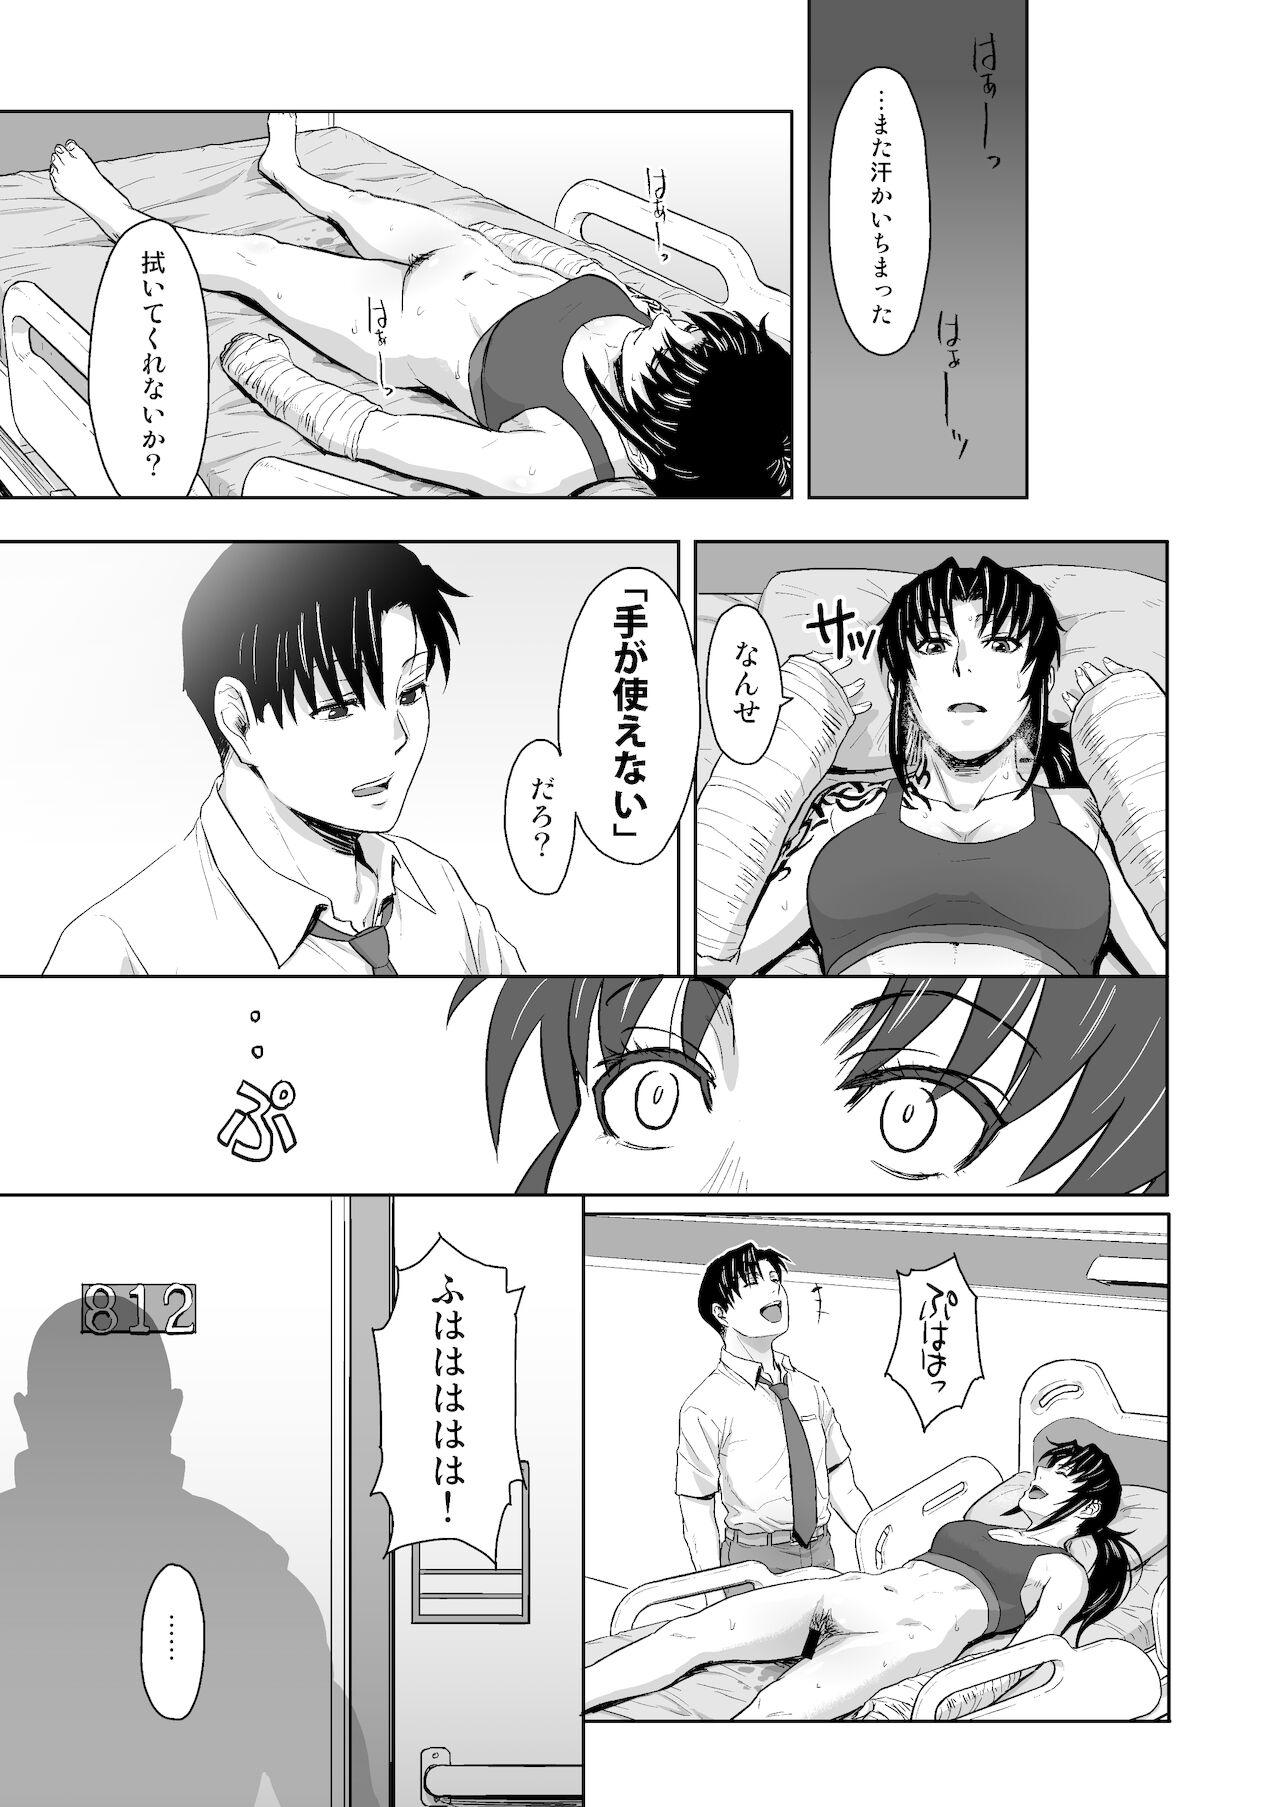 Pee Honeoridoku - I can't use my hands - Black lagoon Snatch - Page 22